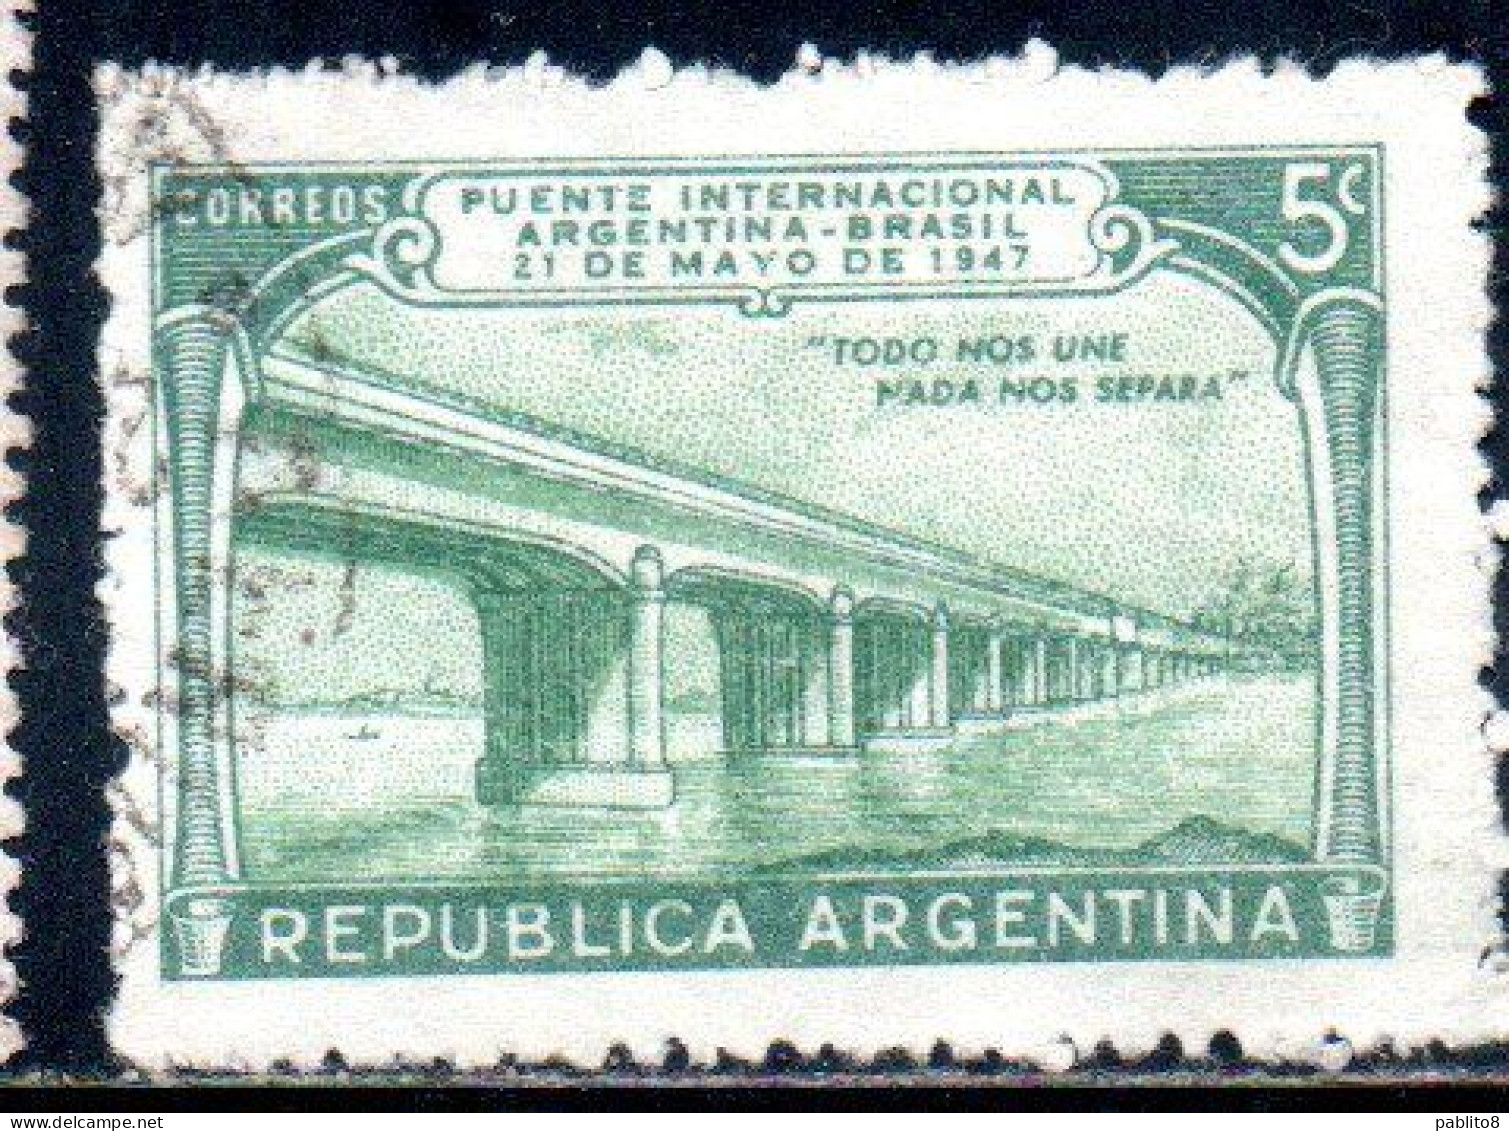 ARGENTINA 1947 OPENING CONNECTING WITH BRAZIL INTERNATIONAL BRIDGE 5c USED USADO OBLITERE' - Oblitérés